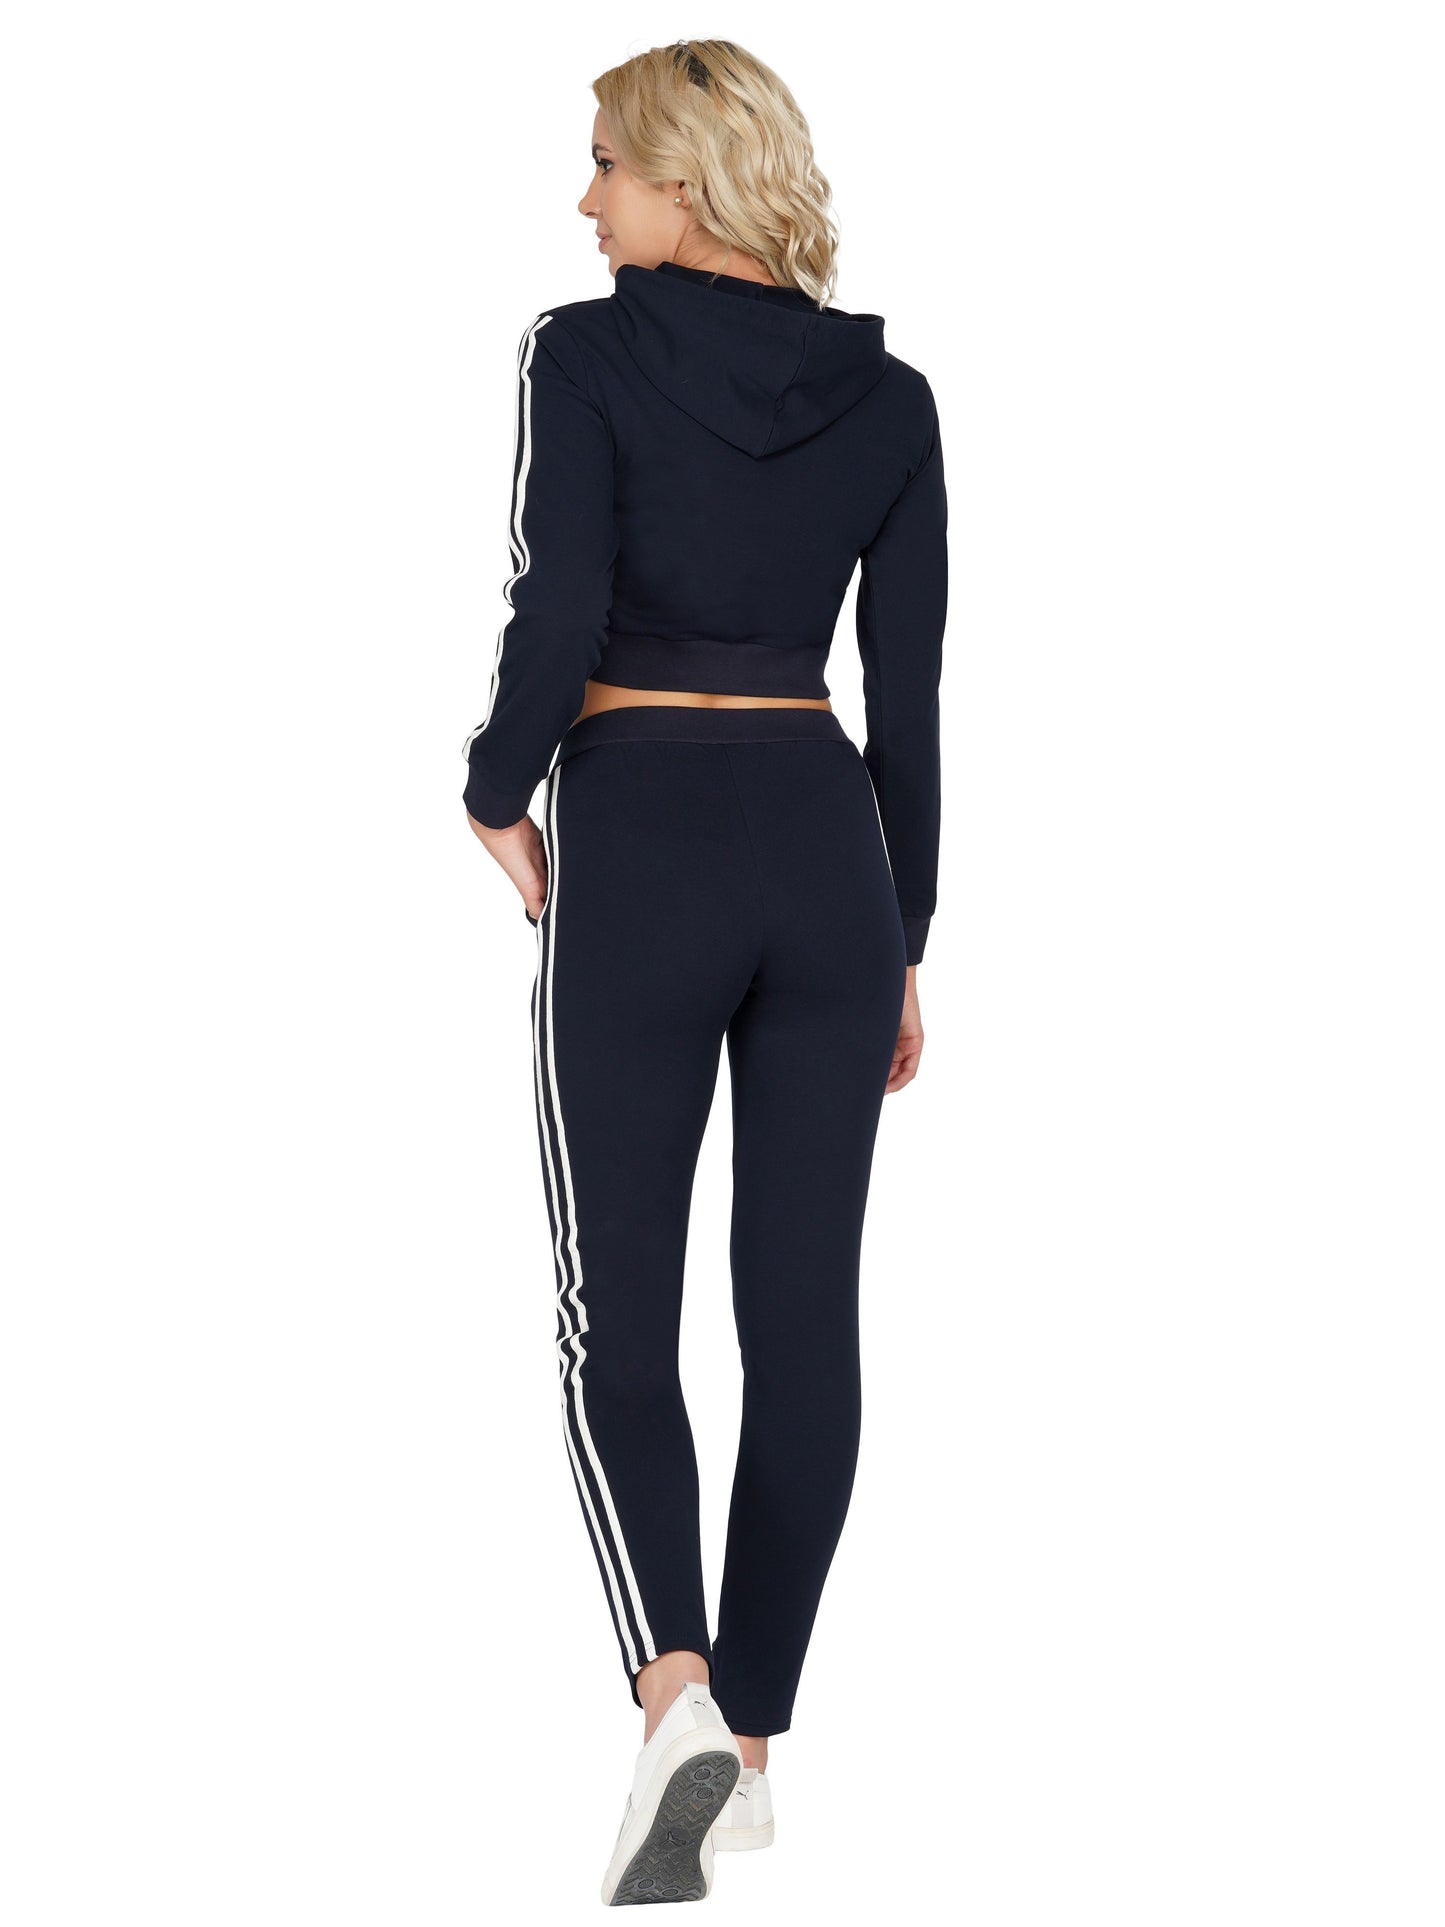 SLAY. Sport Women's Navy Blue Printed Tracksuit with White Side Stripes-clothing-to-slay.myshopify.com-TrackSuit